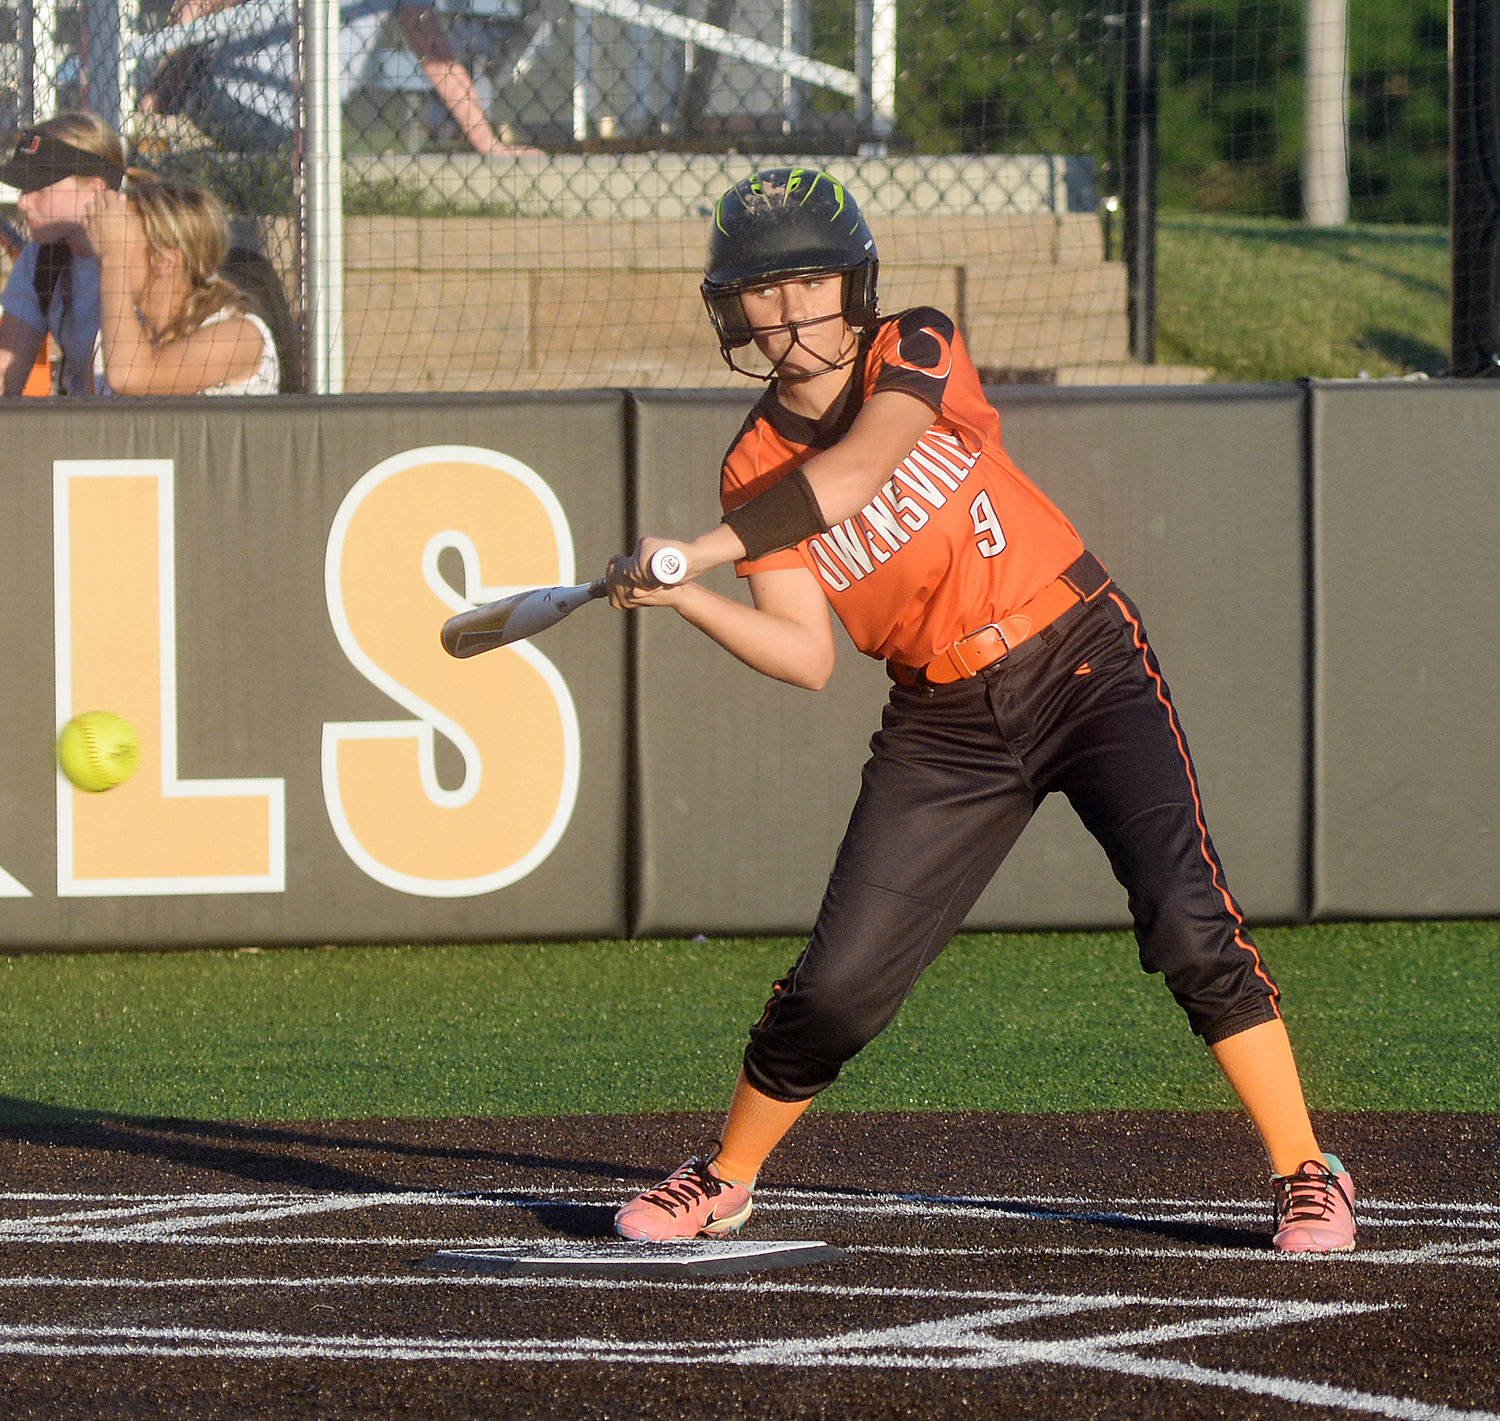 Trinity Rossi pulls her bat back from an outside pitch for a ball during Owensville’s 12-7 victory in junior-varsity softball action last Thursday night at OHS Field against the visiting Union’s JV Lady Wildcats.